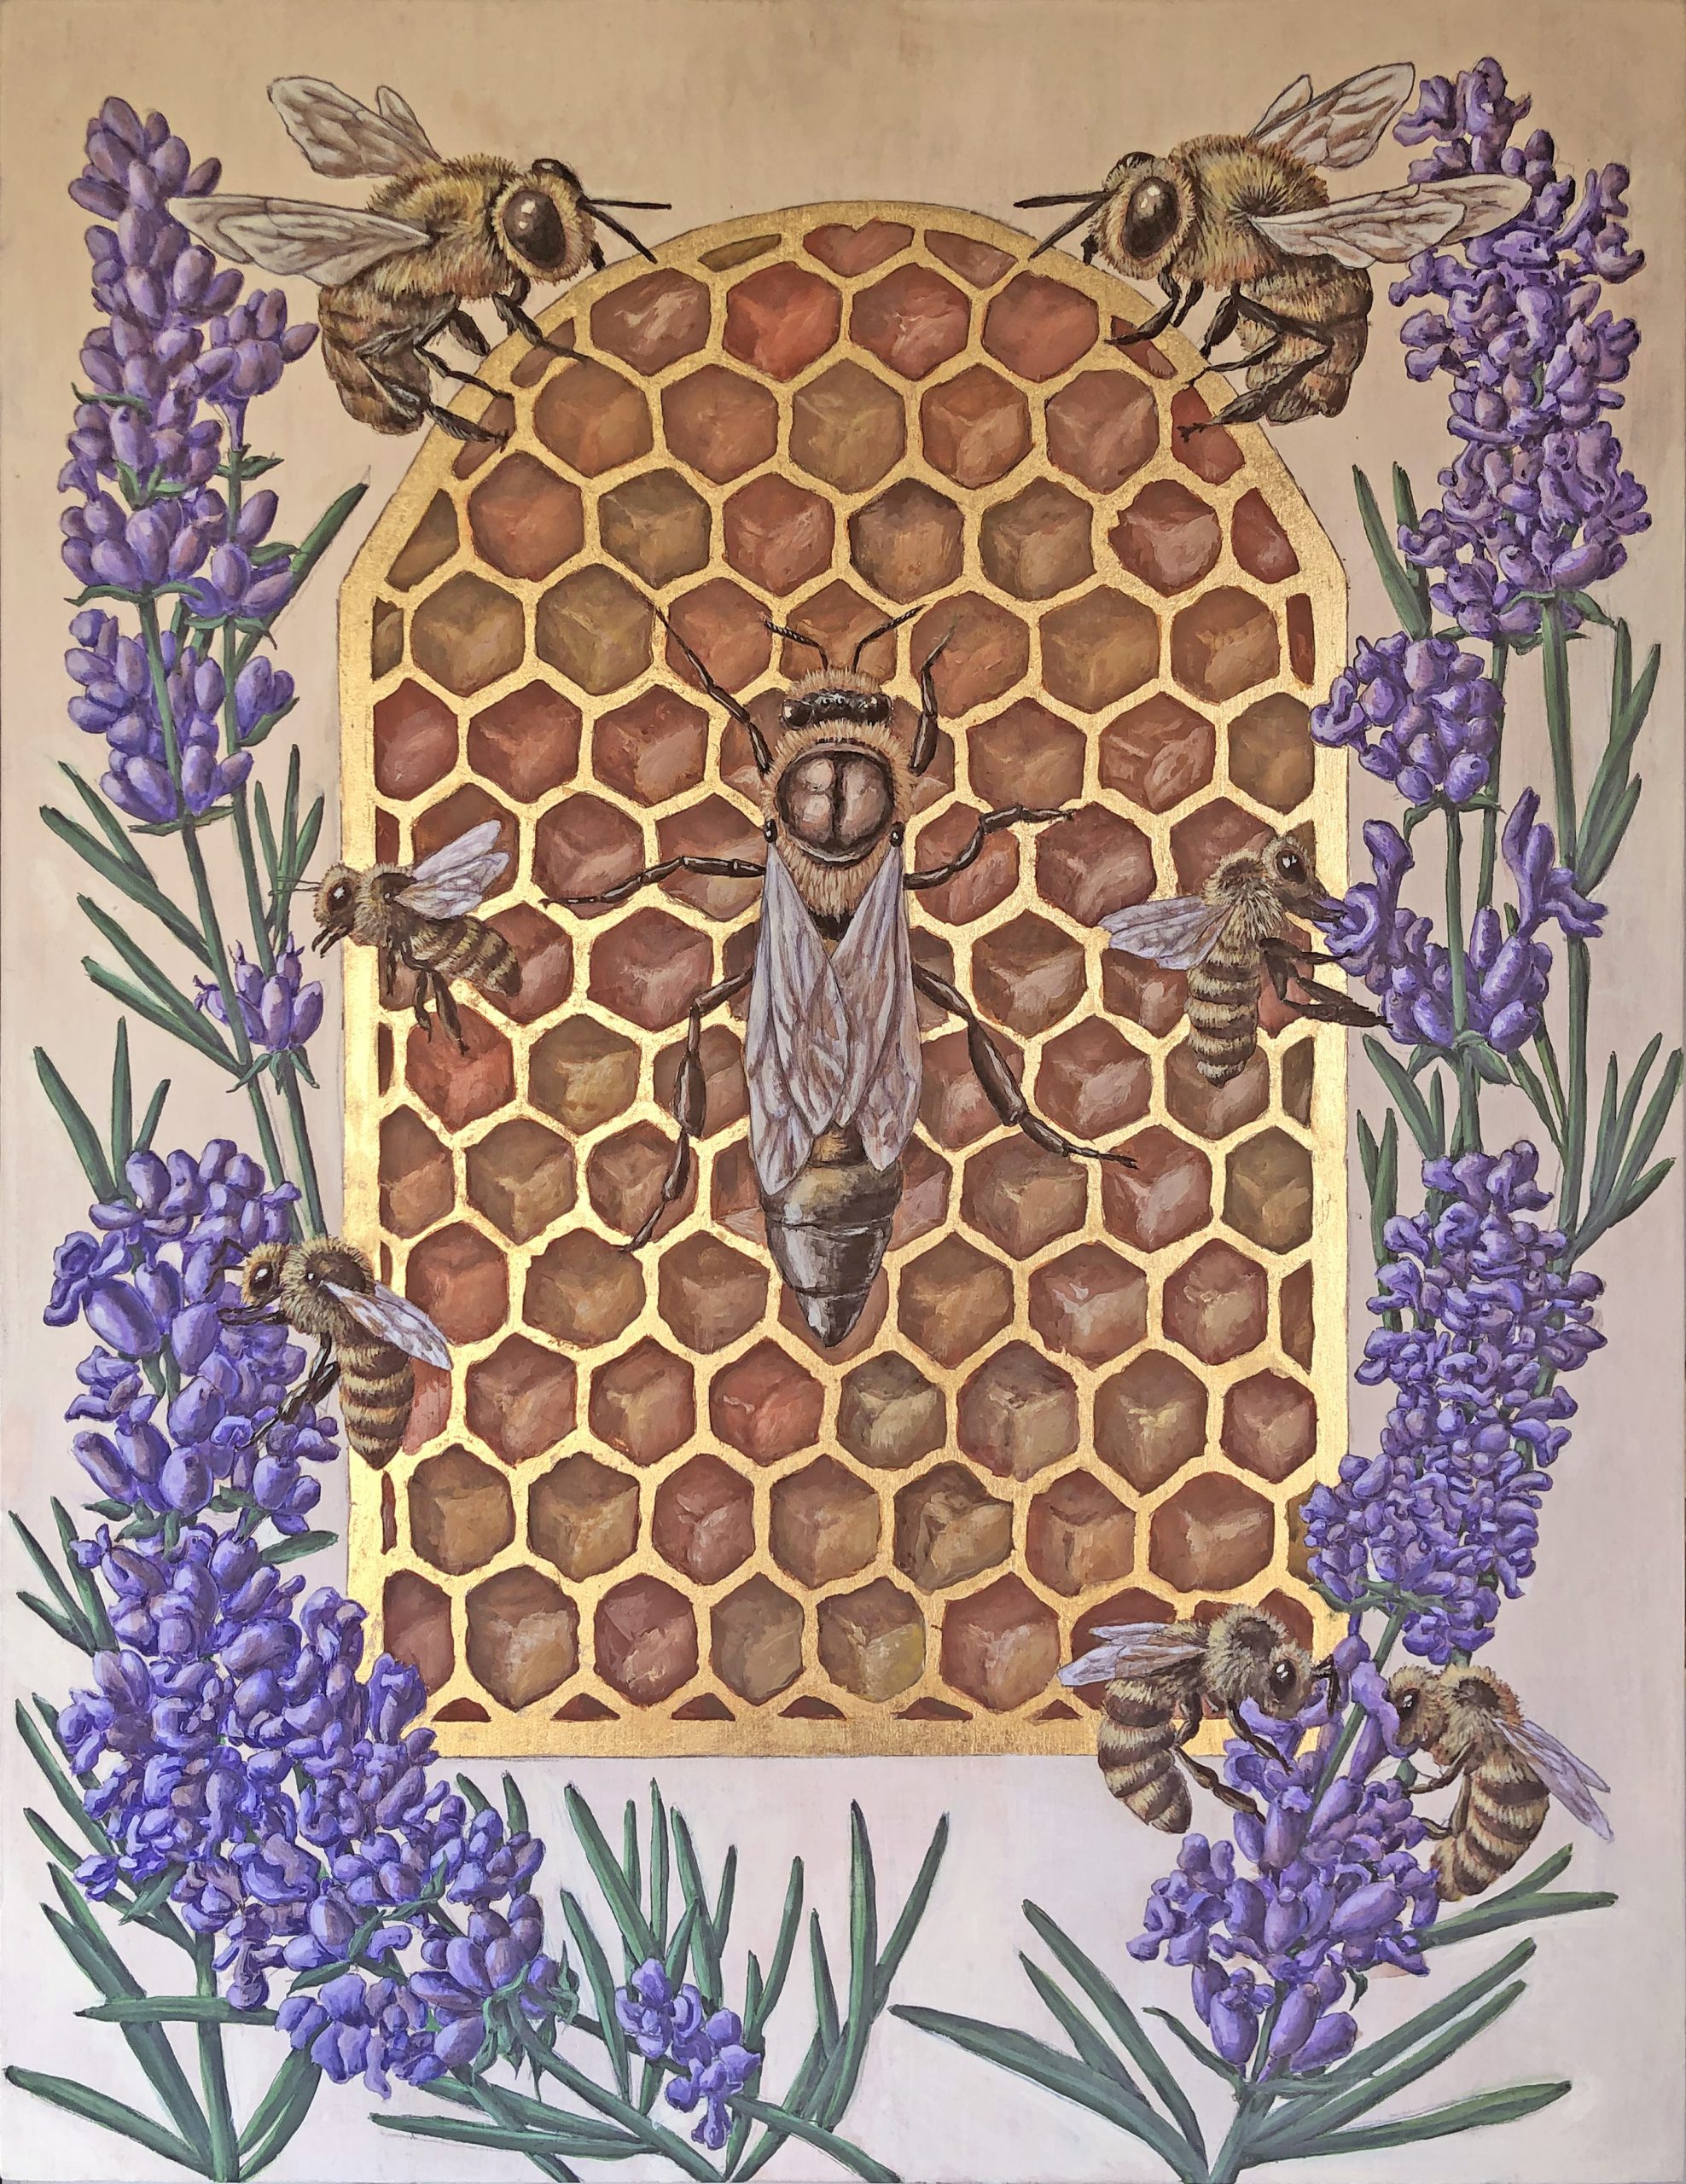 Picture of bees surrounding a honeycomb and flowers